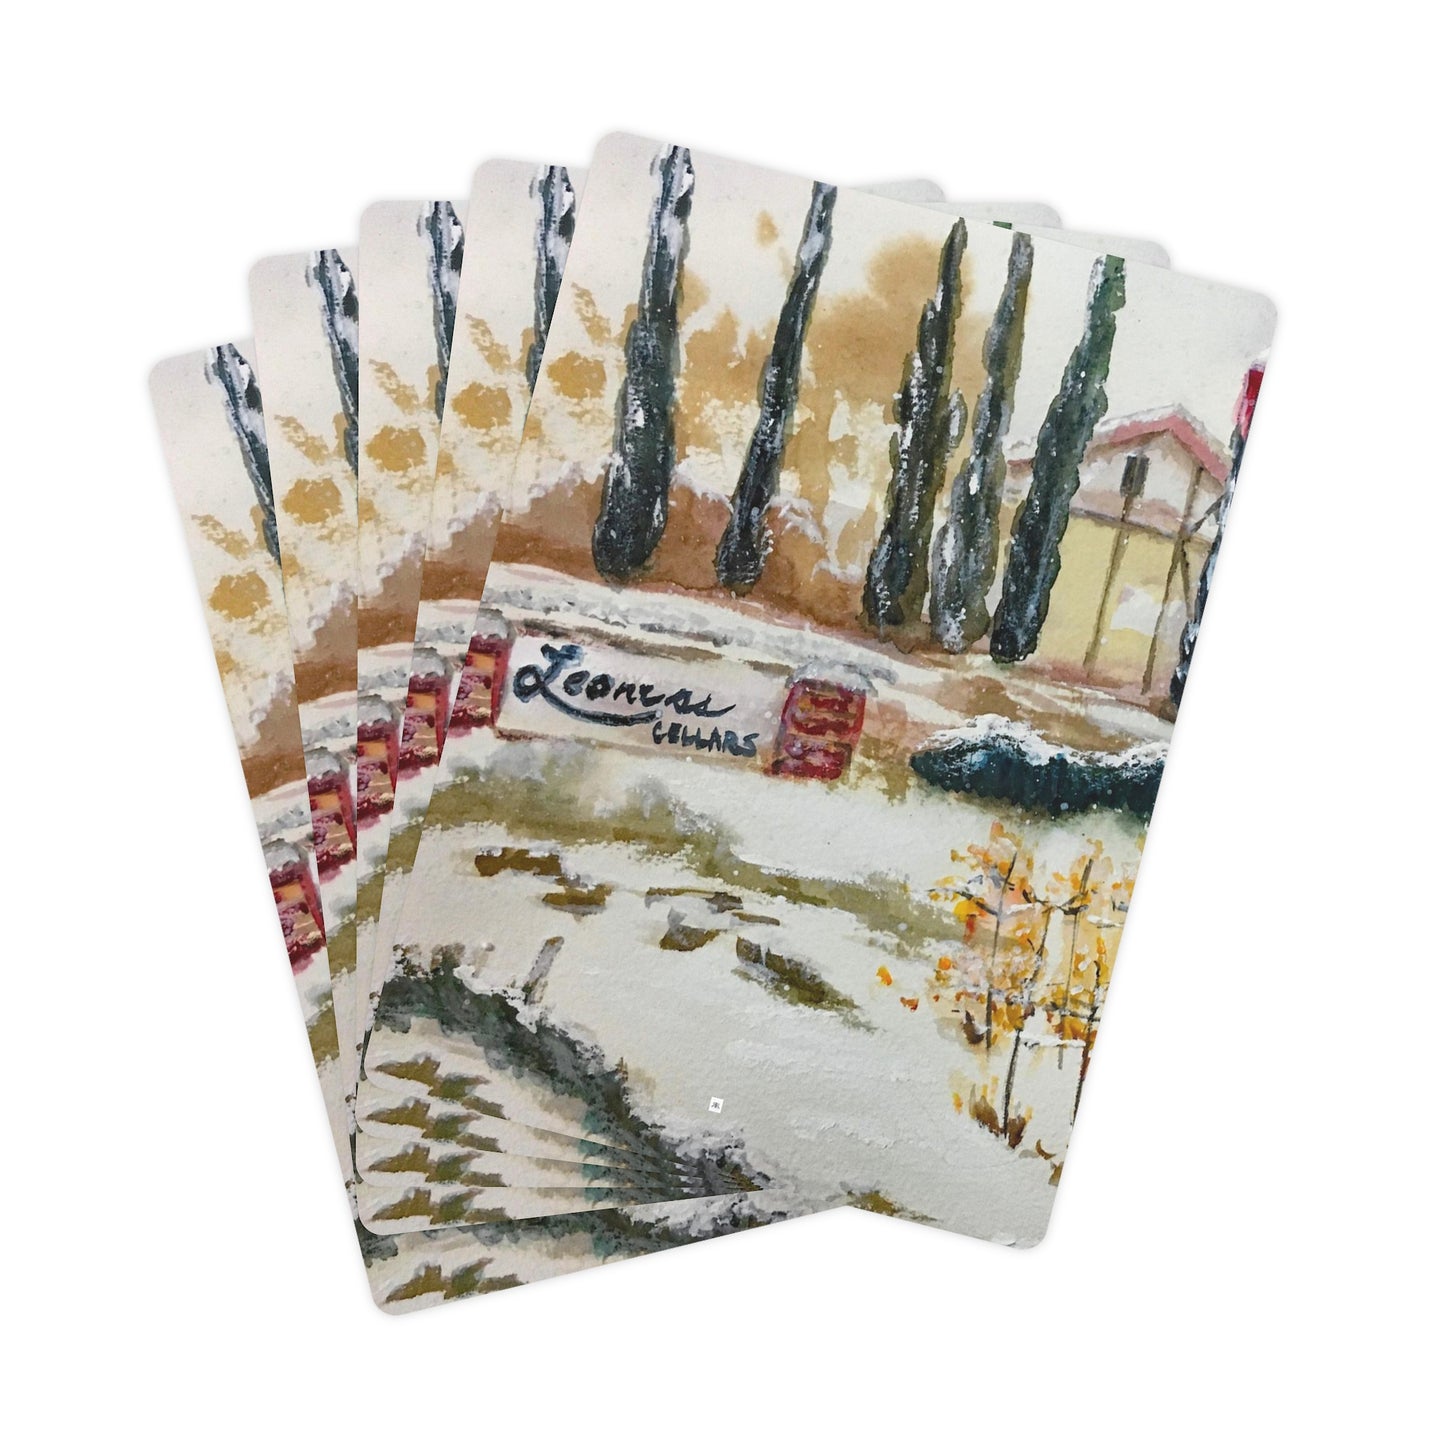 Leoness Cellars (that day it snowed in Temecula) Poker Cards/Playing Cards